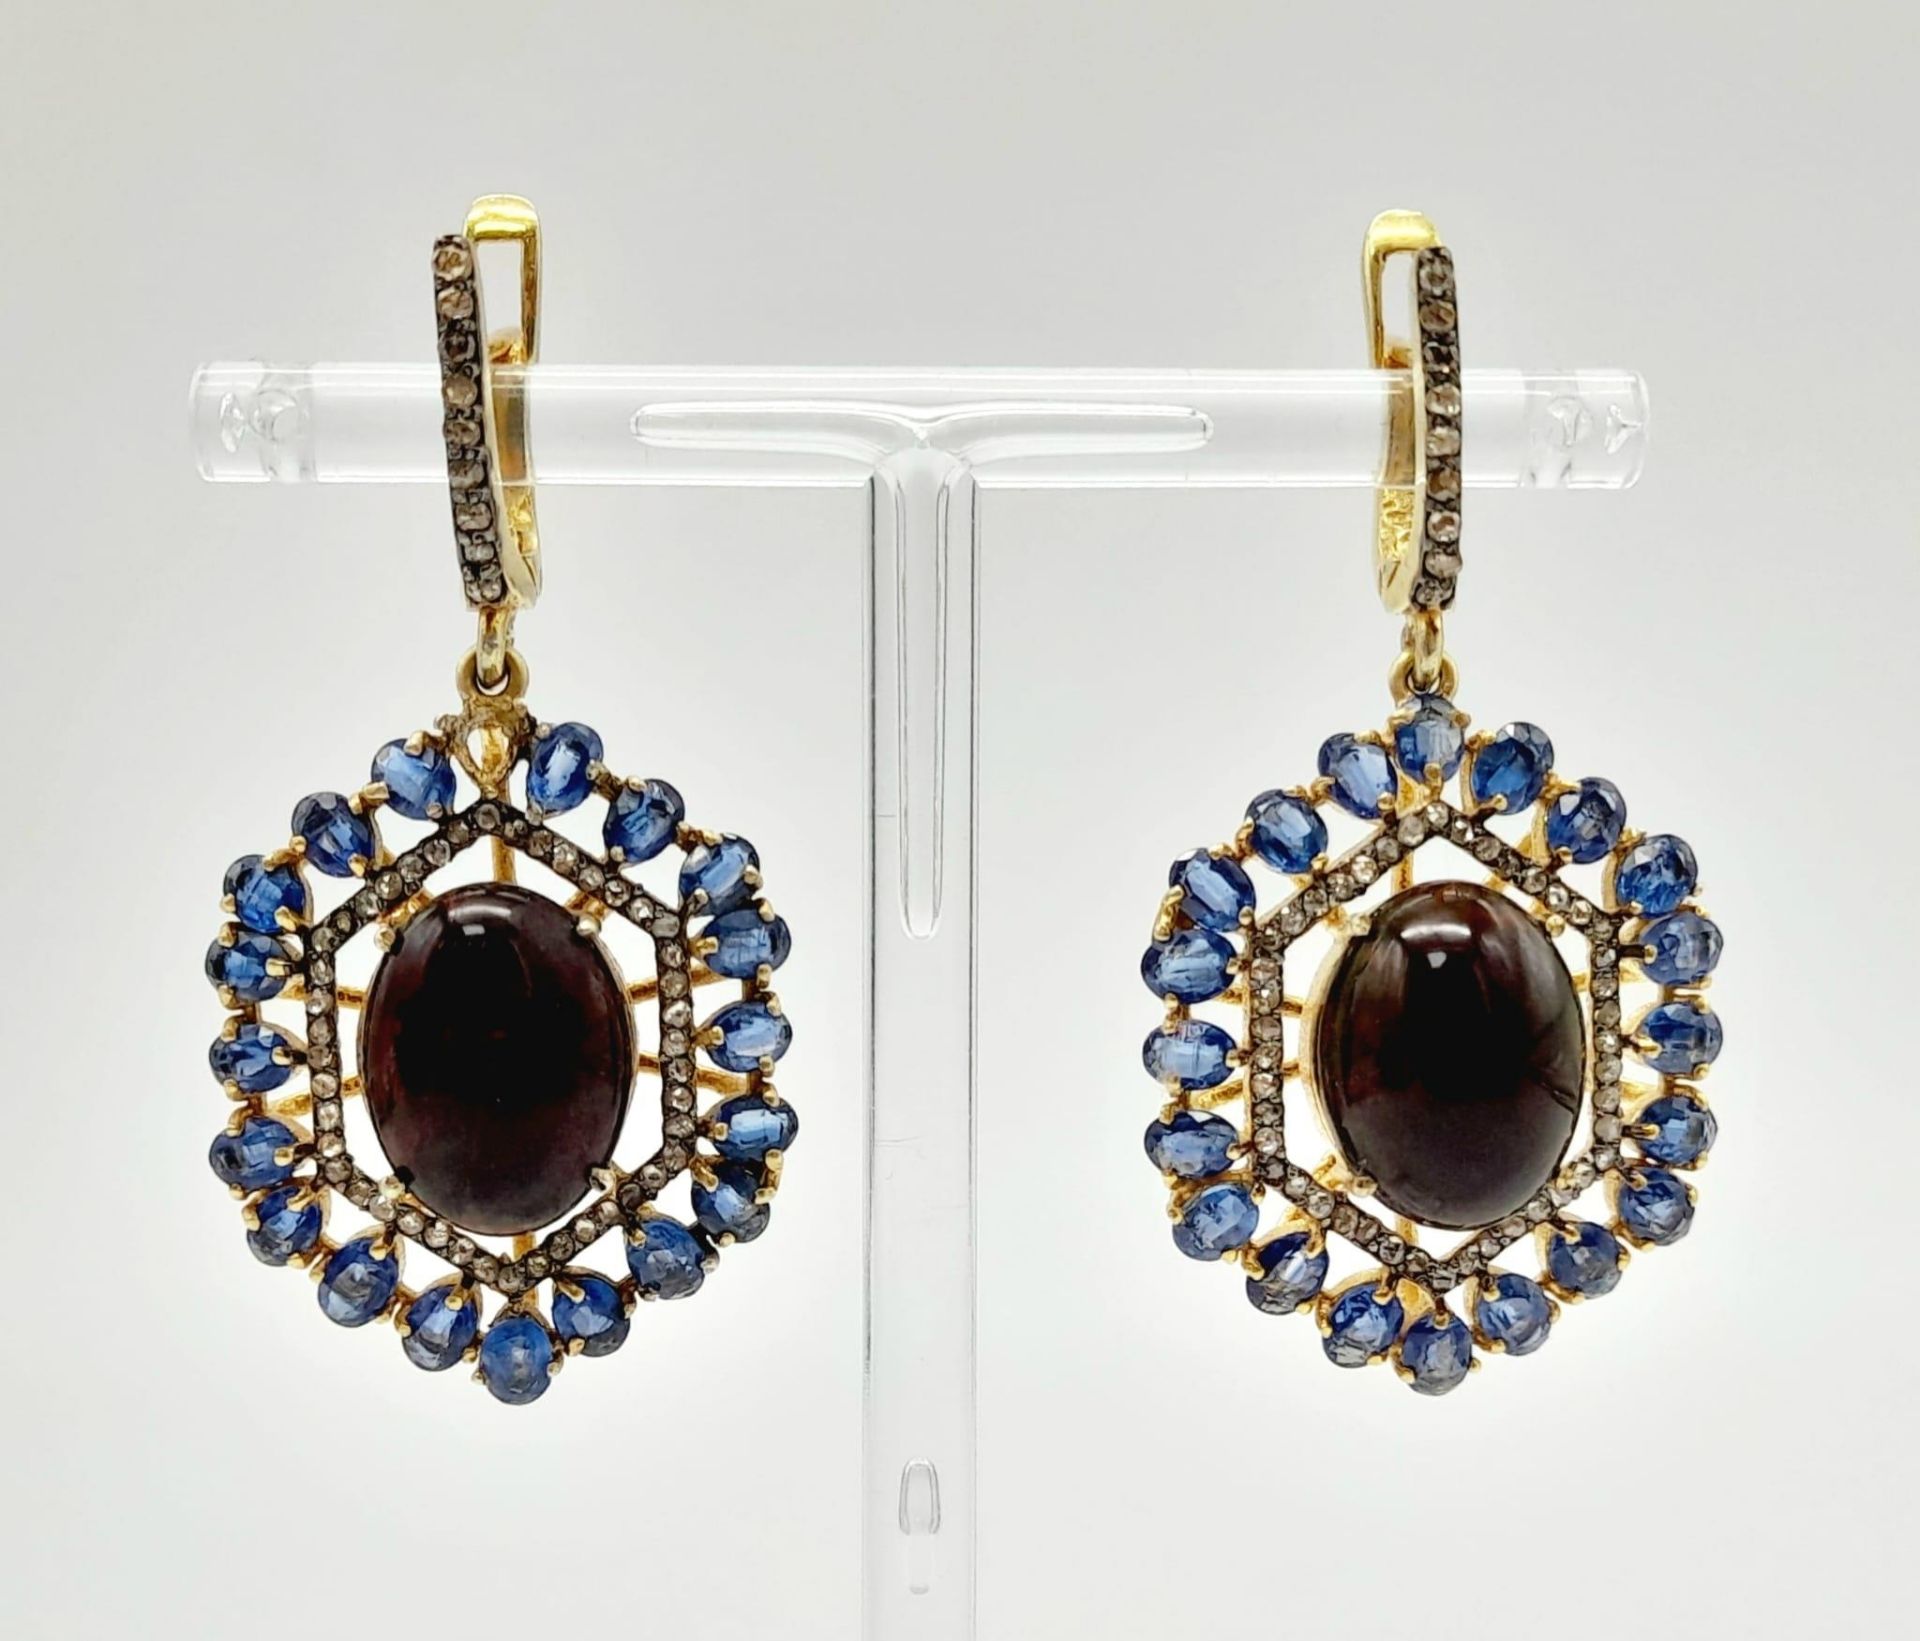 A Pair of Fire Opal and Kyanite Gemstone Hexagonal Drop Earrings. Set in gold plated 925 silver.